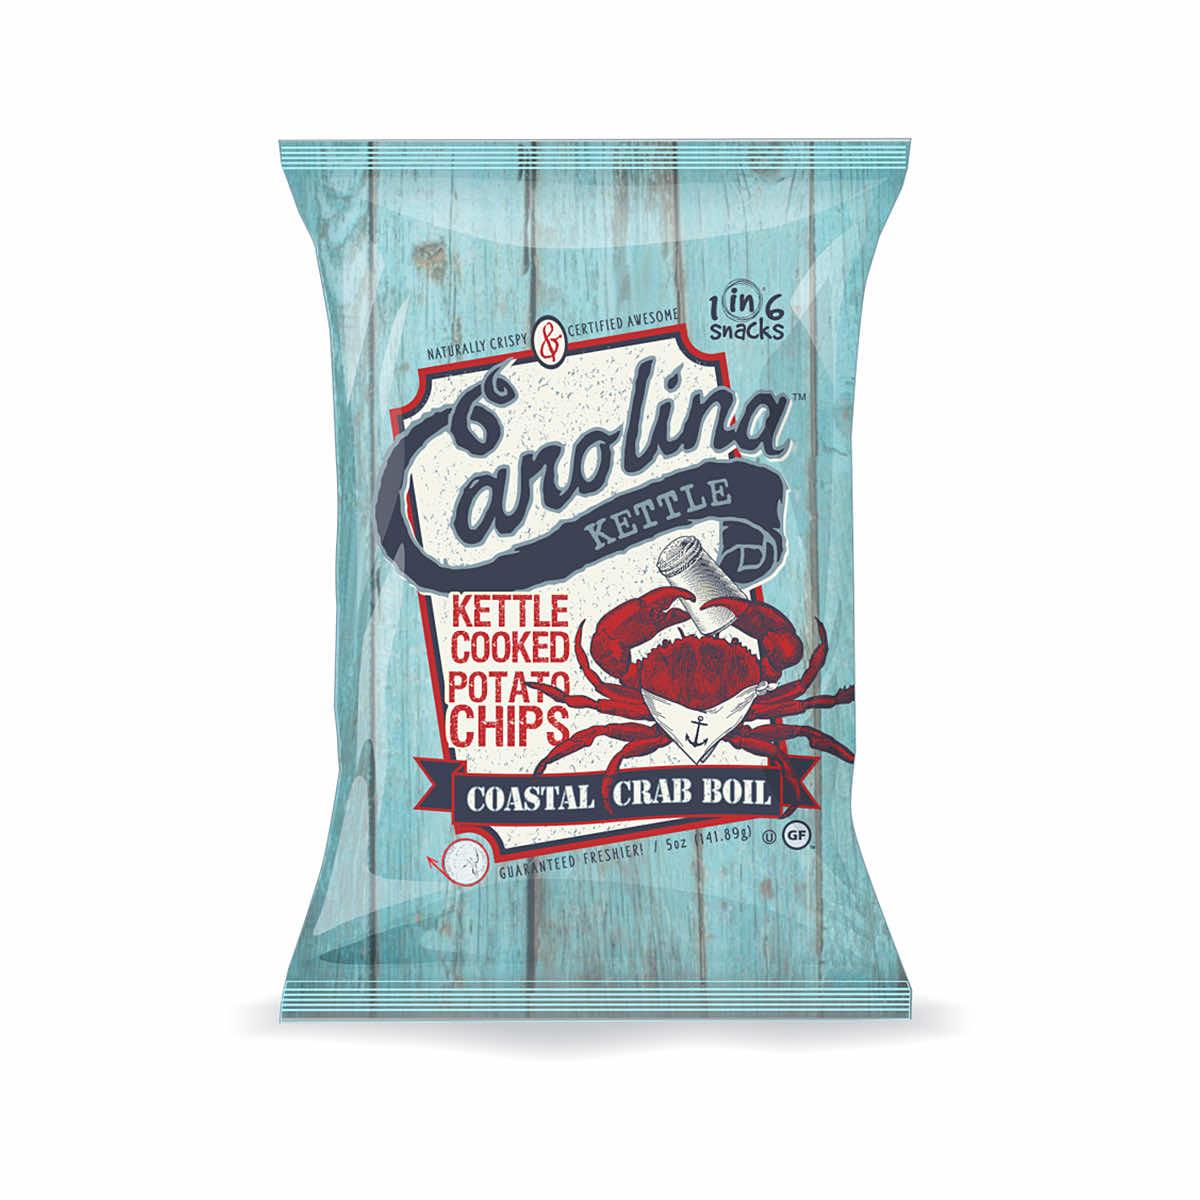  Coastal Crab Boil Kettle Cooked Potato Chips - 2 Ounce